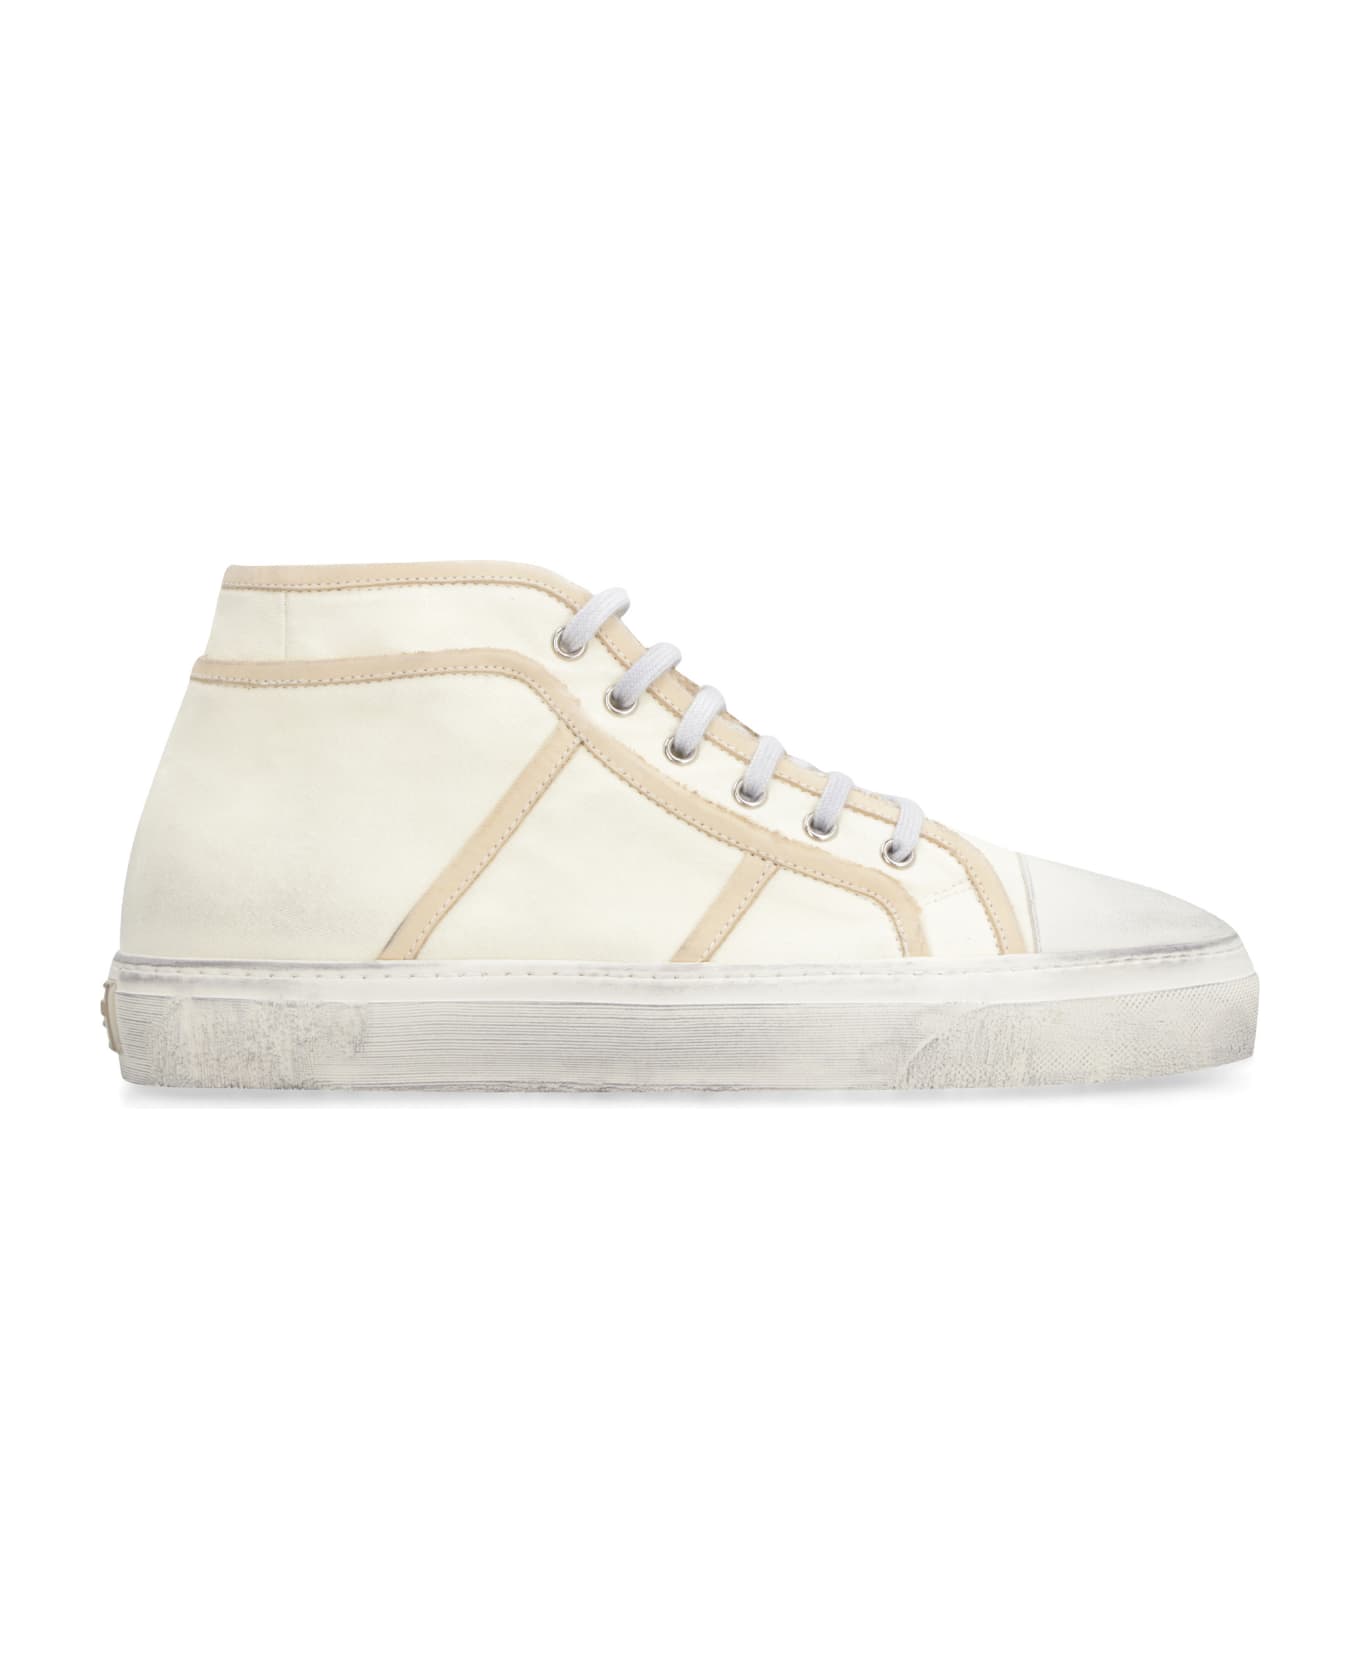 Dolce & Gabbana Canvas Mid-top Sneakers - Ivory